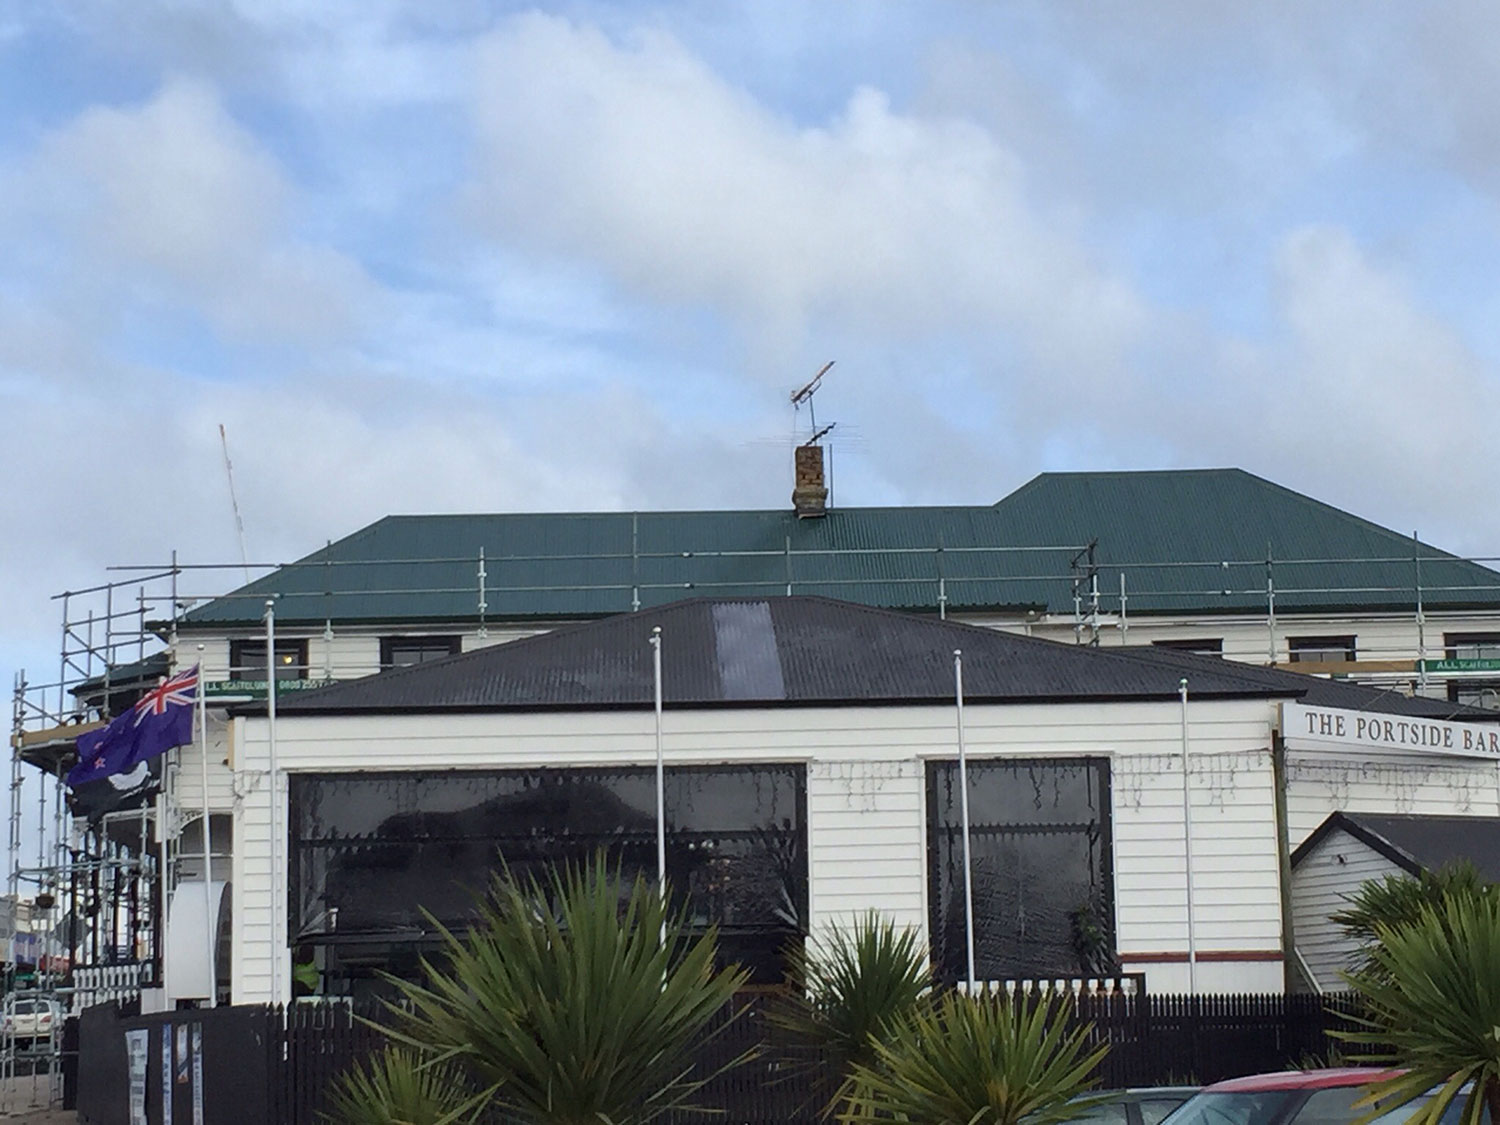 auckland roofing solutions services auckland and new zealand wide new roofs repair cladding and more Project gallery 55